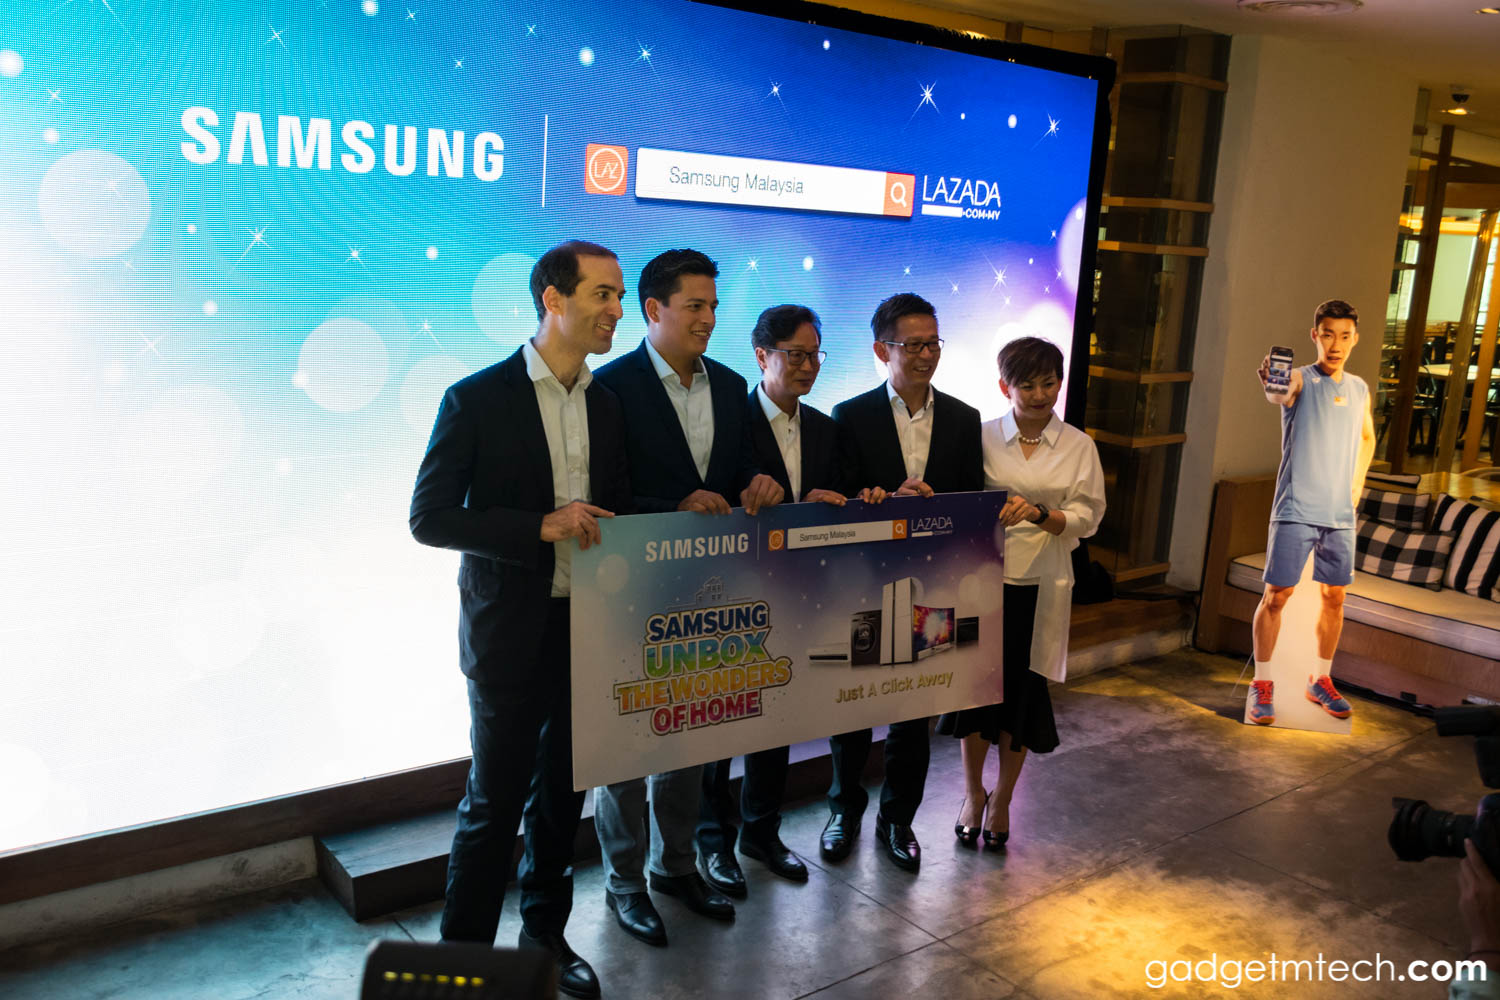 Samsung Unbox the Wonders of Home Launch